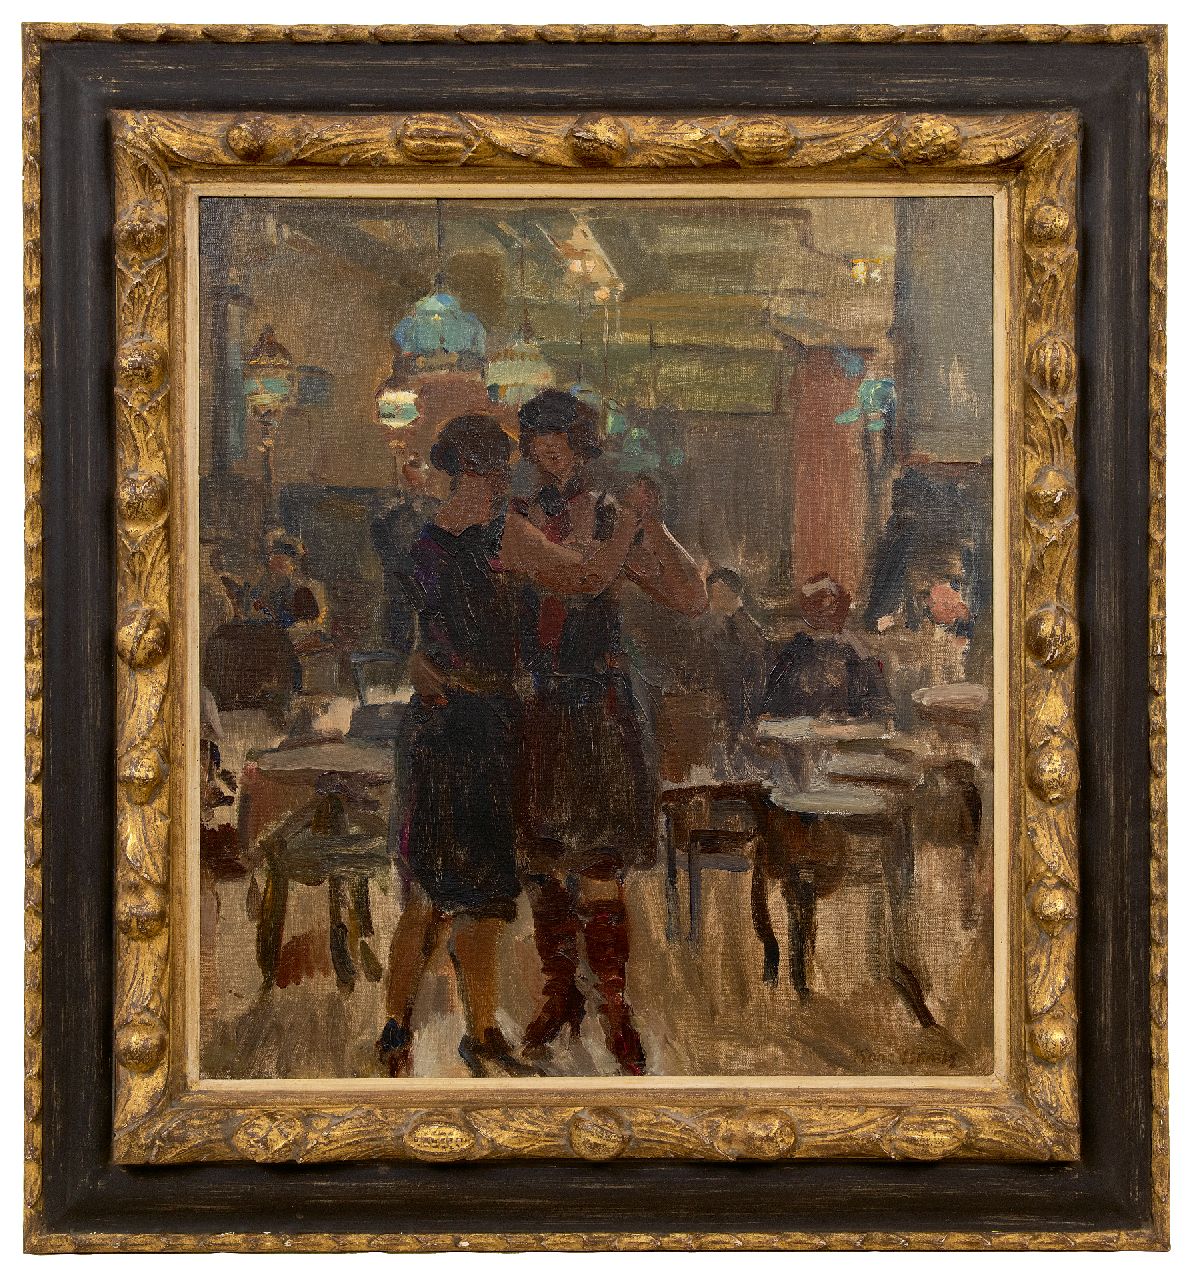 Israels I.L.  | 'Isaac' Lazarus Israels, The café Scala, The Hague, Öl auf Leinwand 65,0 x 58,0 cm, signed l.r. und painted between 1927-1934